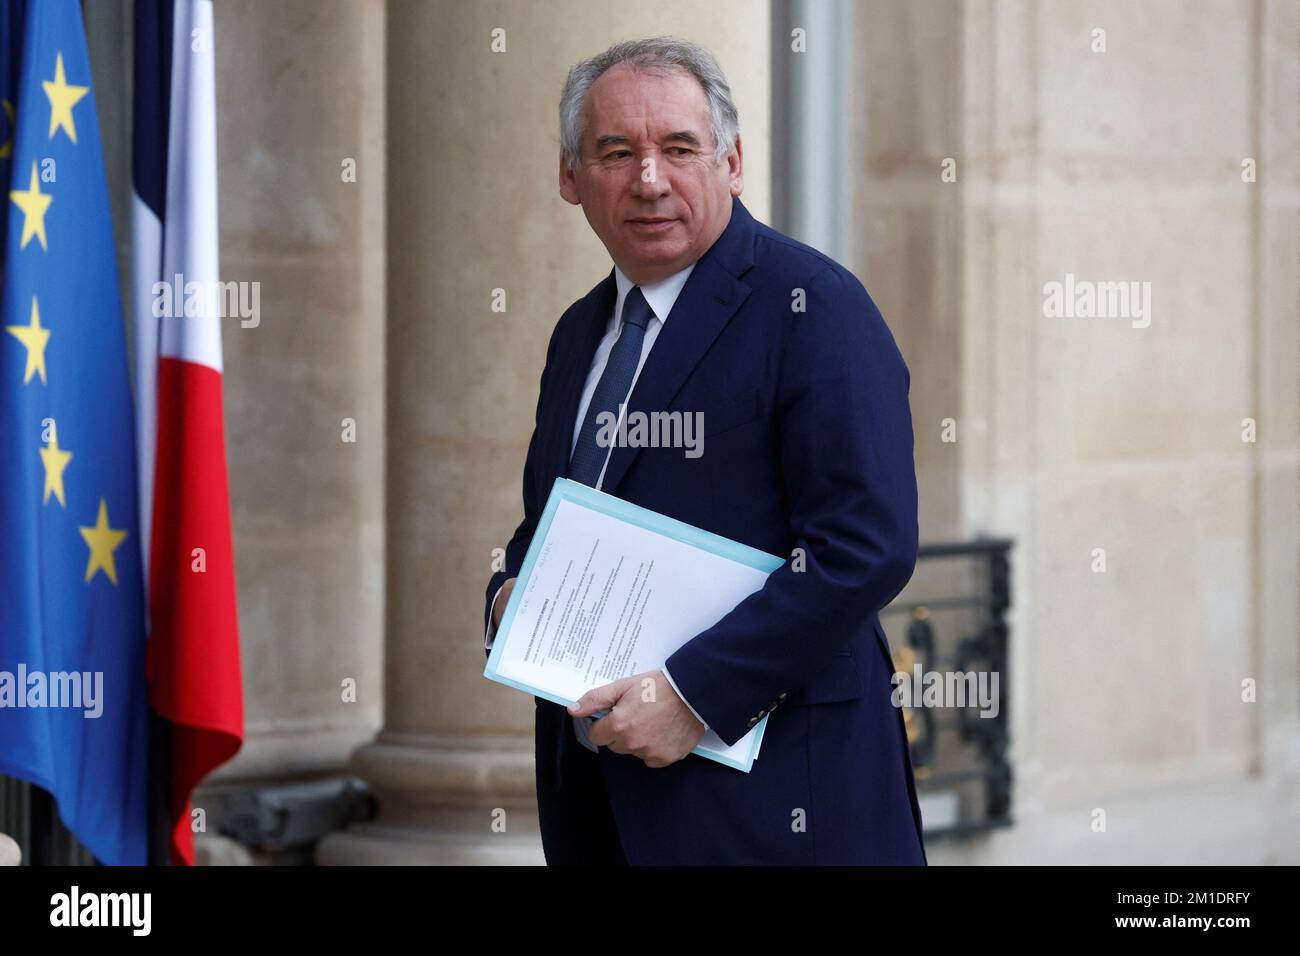 Francois Bayrou, leader of French centrist party MoDem (Mouvement  Democrate), arrives to attend the second plenary session of the Conseil  National de la Refondation (CNR - National Council for Refoundation) at the